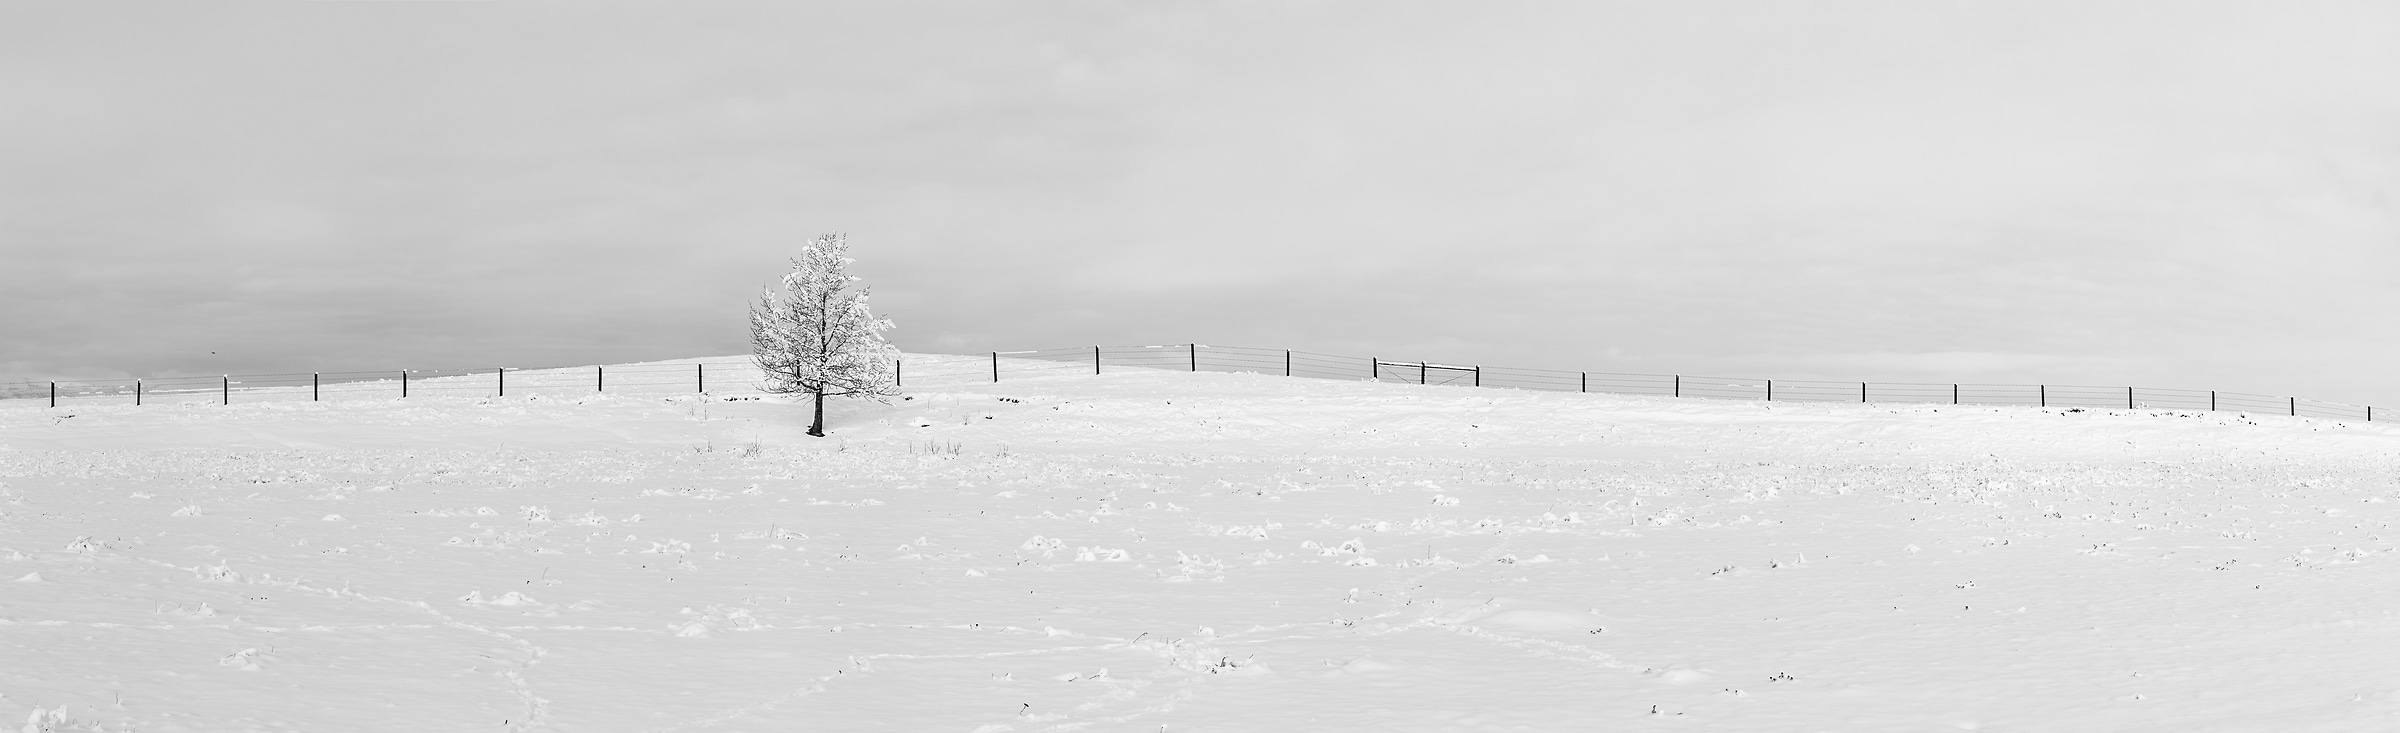 564 megapixels! A very high resolution, large-format, black & white VAST photo print of a snowy field with a tree; landscape photograph created by Scott Dimond in Cayley, Alberta, Canada